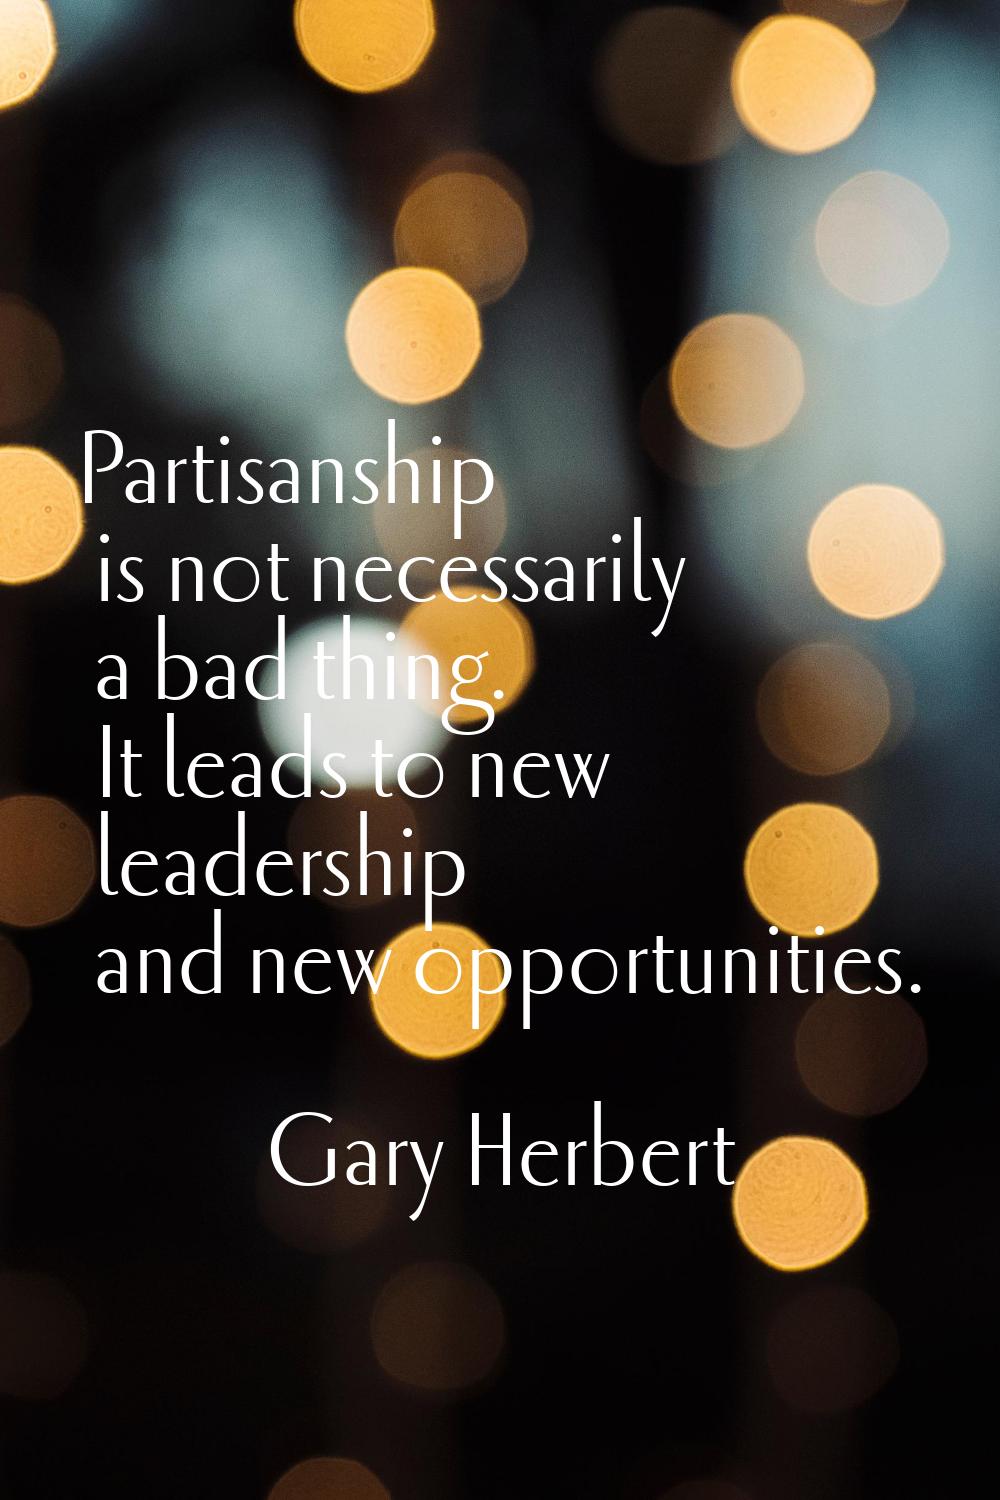 Partisanship is not necessarily a bad thing. It leads to new leadership and new opportunities.